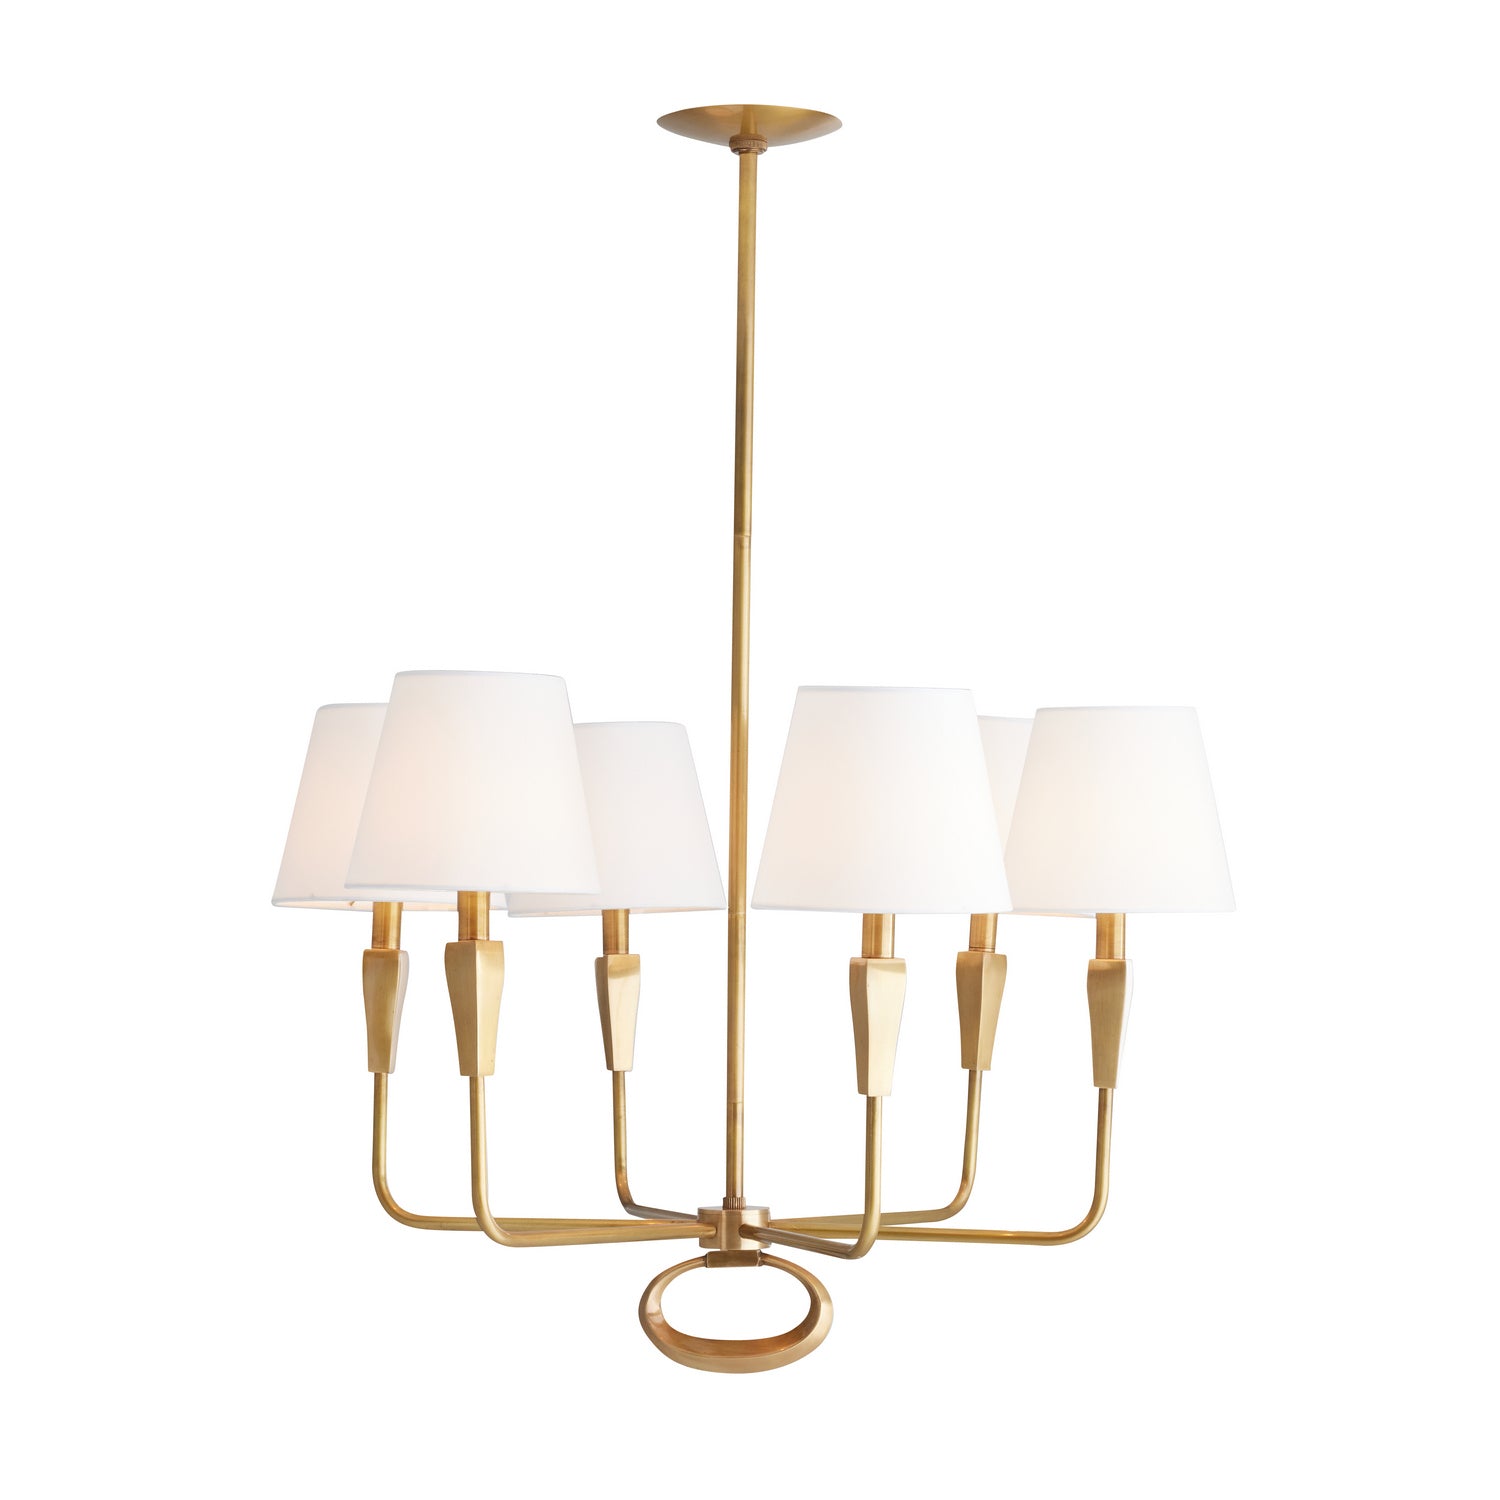 Six Light Chandelier from the Jeremiah collection in Vintage Brass finish